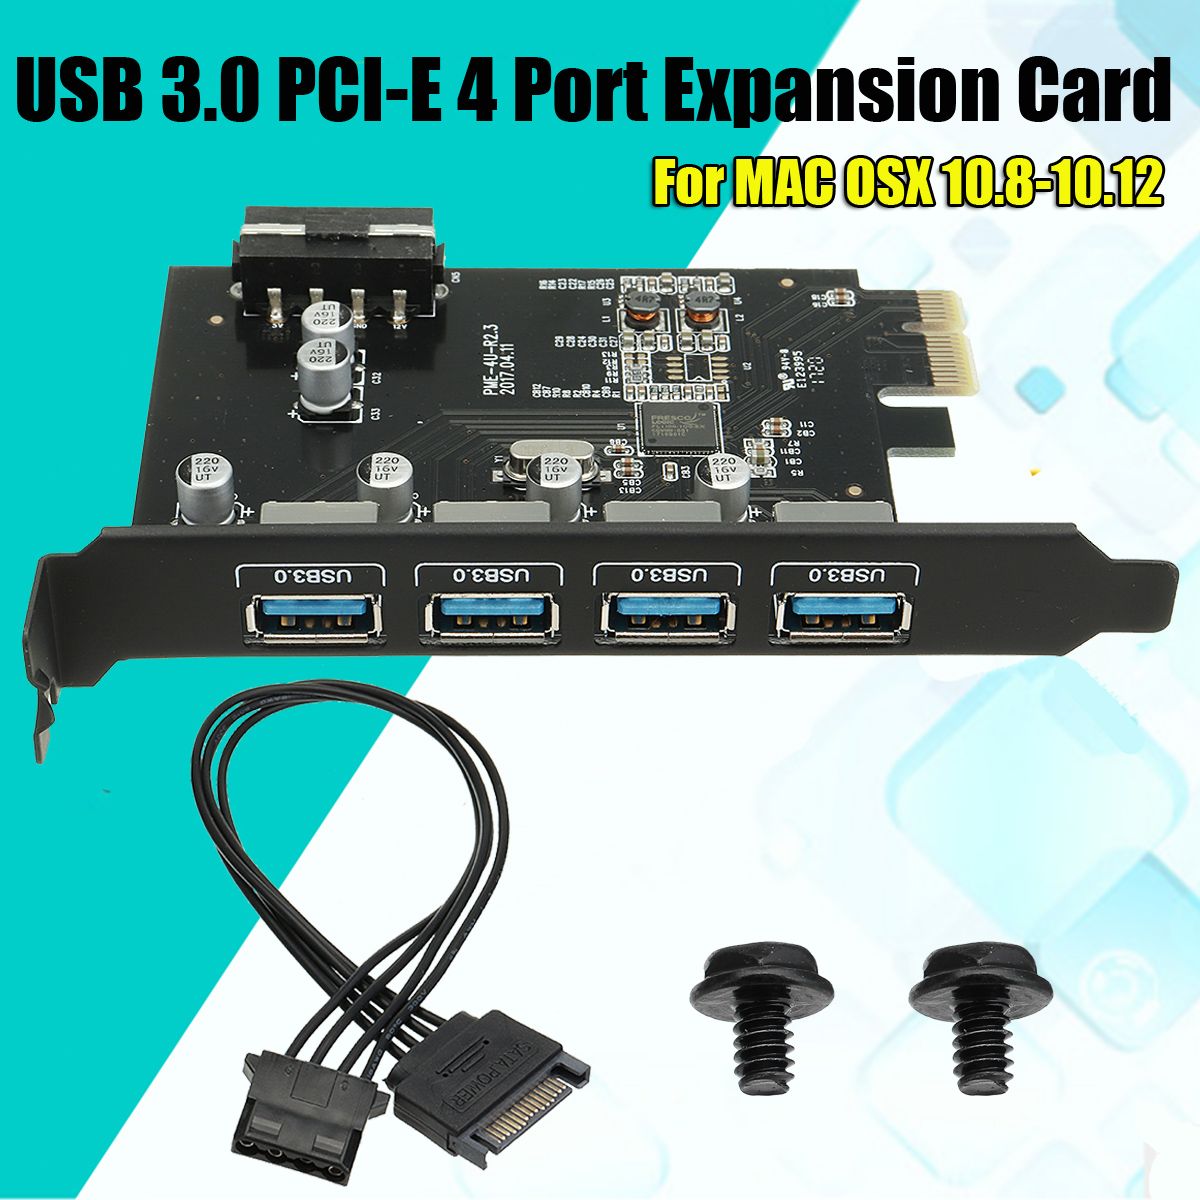 Super-Speed-PCI-E-4-Port-USB-30-Expansion-Card-For-MAC-OSX-108-1012-1343556